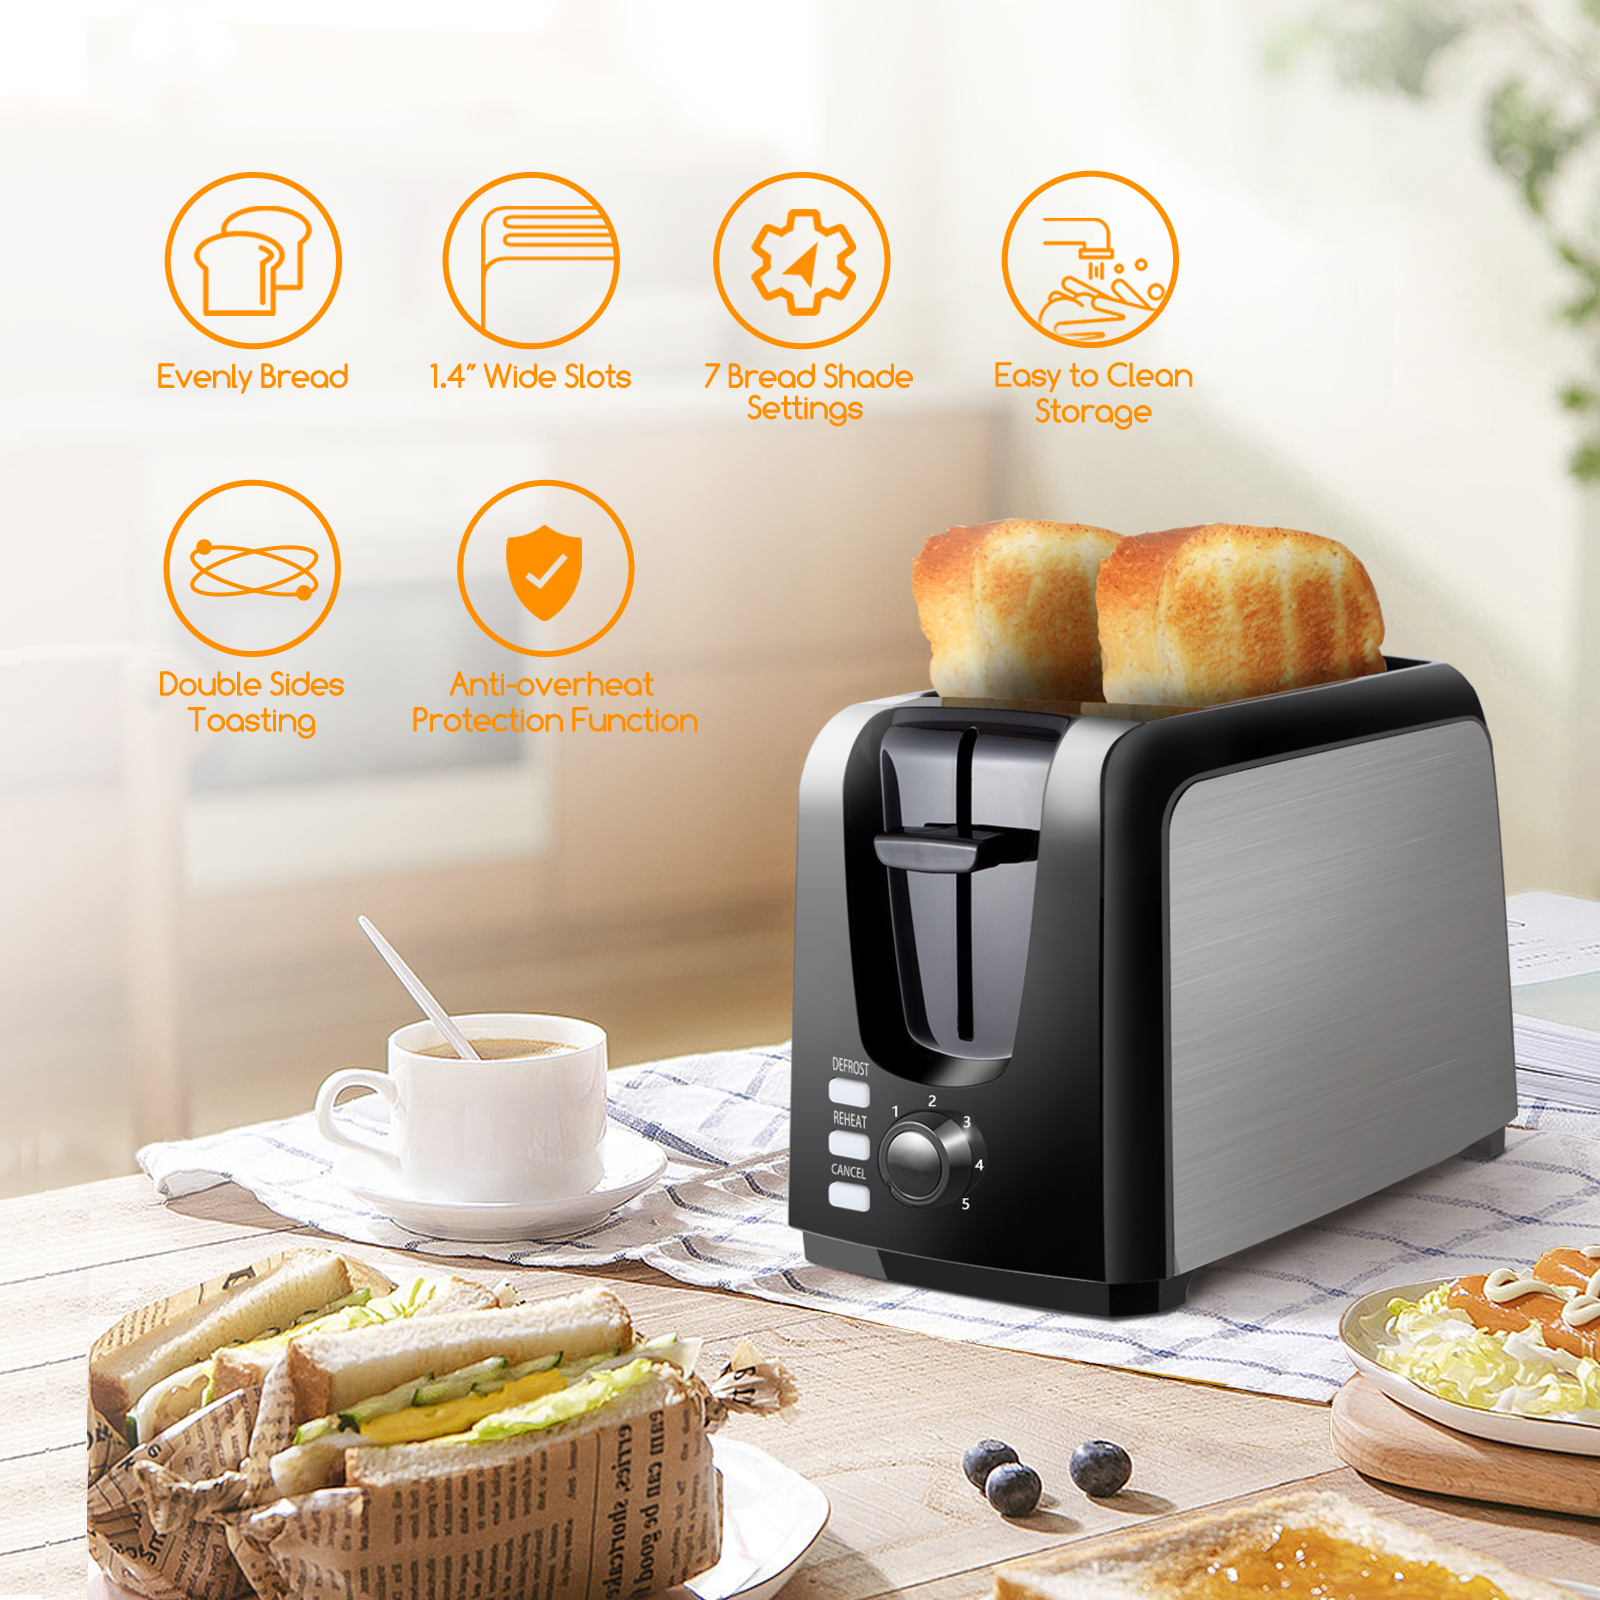 Toaster 2 Slice Best Rated Prime Wide Slot Stainless Steel Toasters 